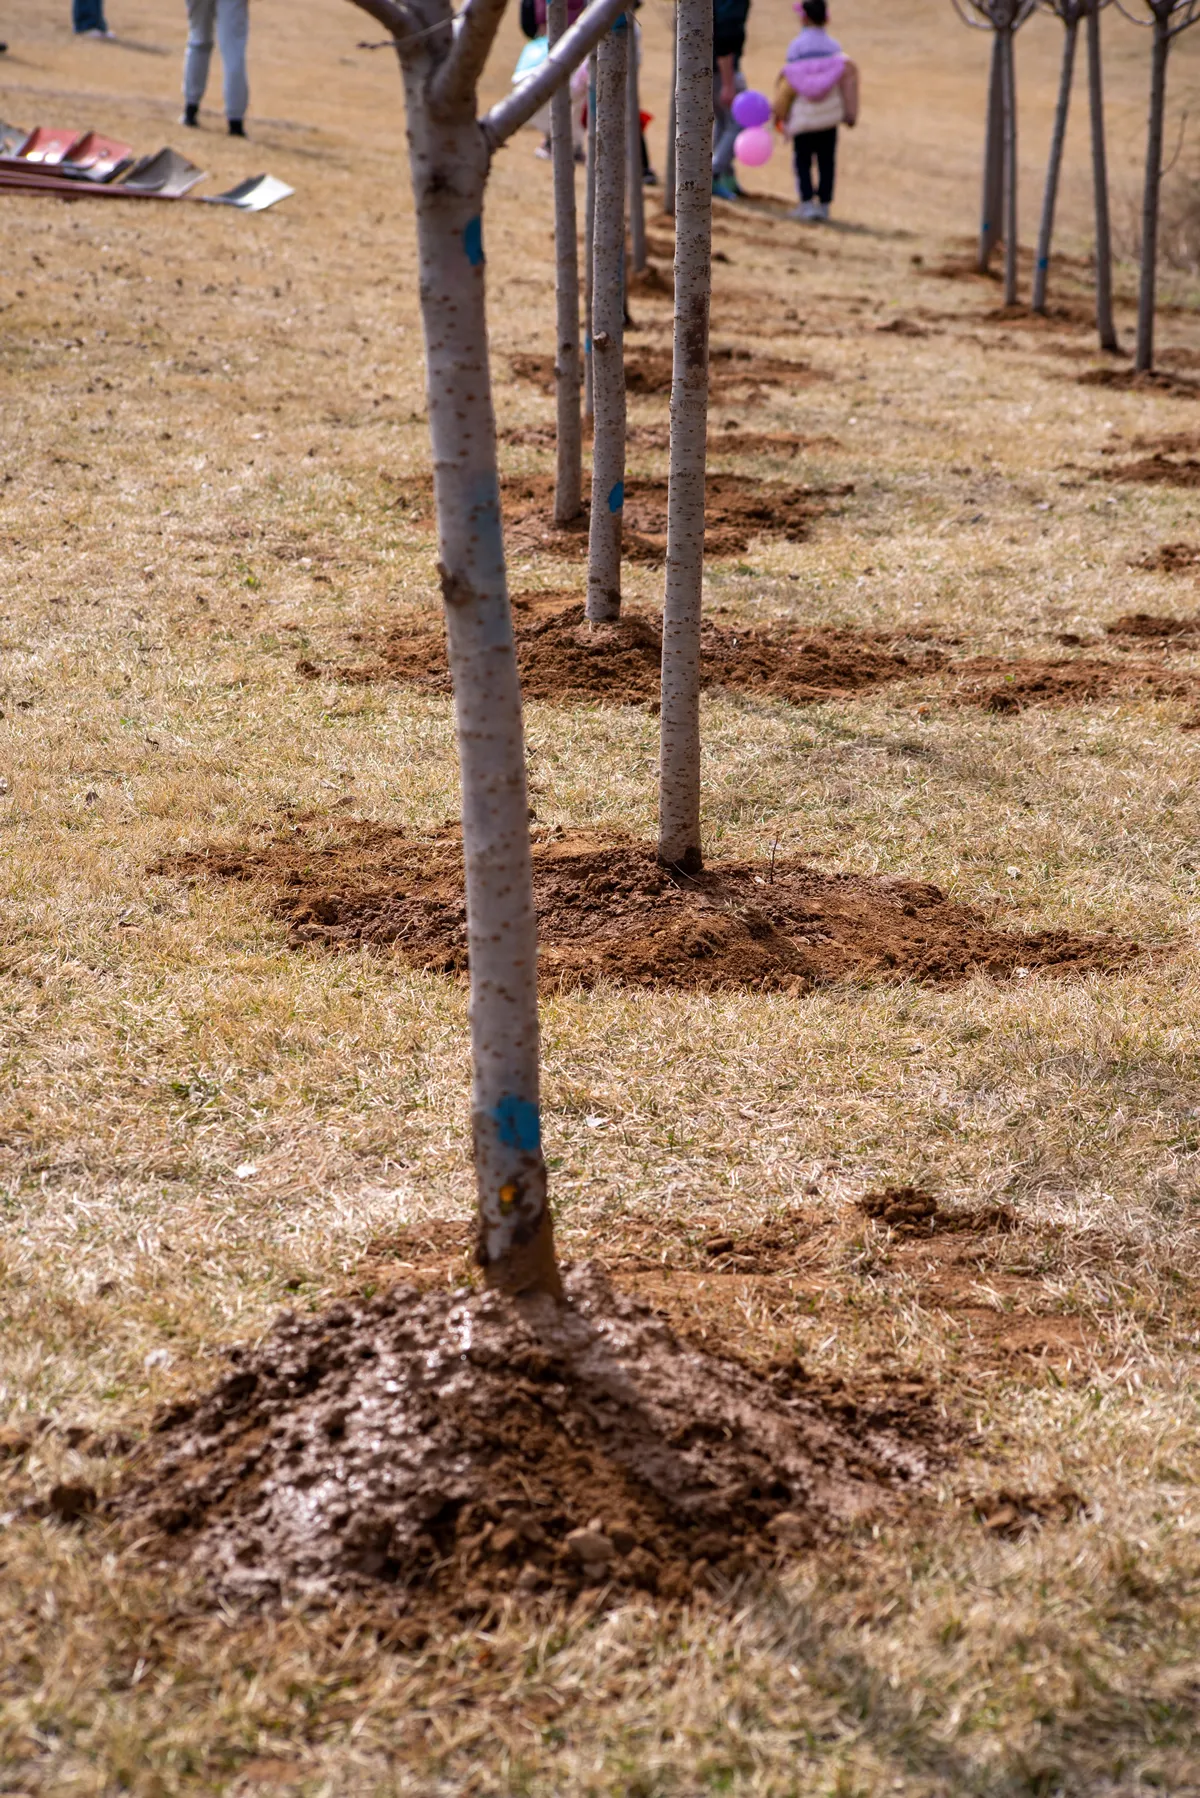 Saplings of fruit trees with soil covered roots